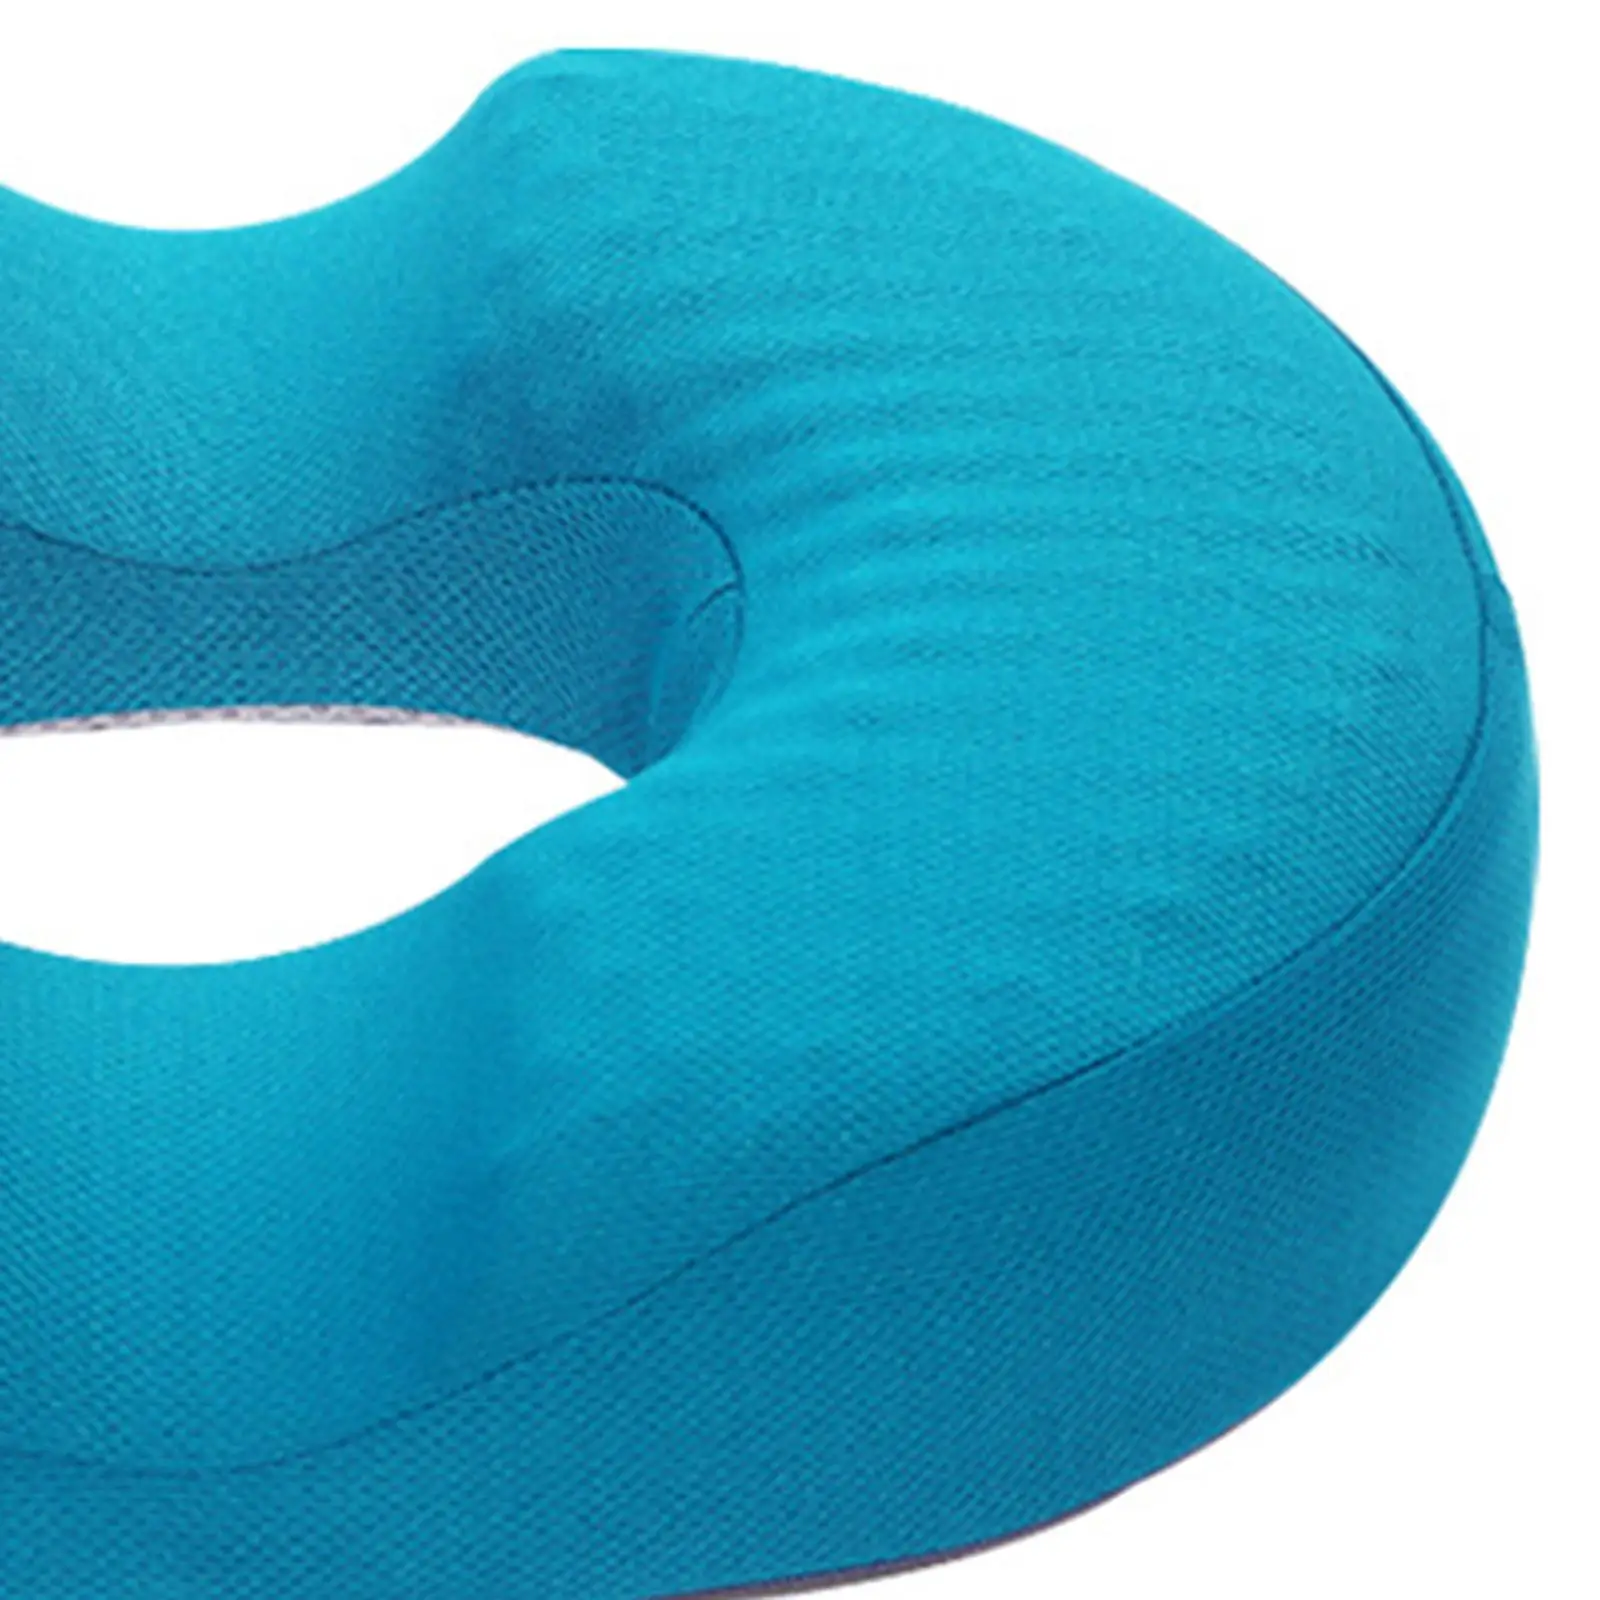 Donut Chair Cushion for Adults Elderly for Office Chair for Long Sitting Portable  Pad Zip Cover Lightweight Memory Foam